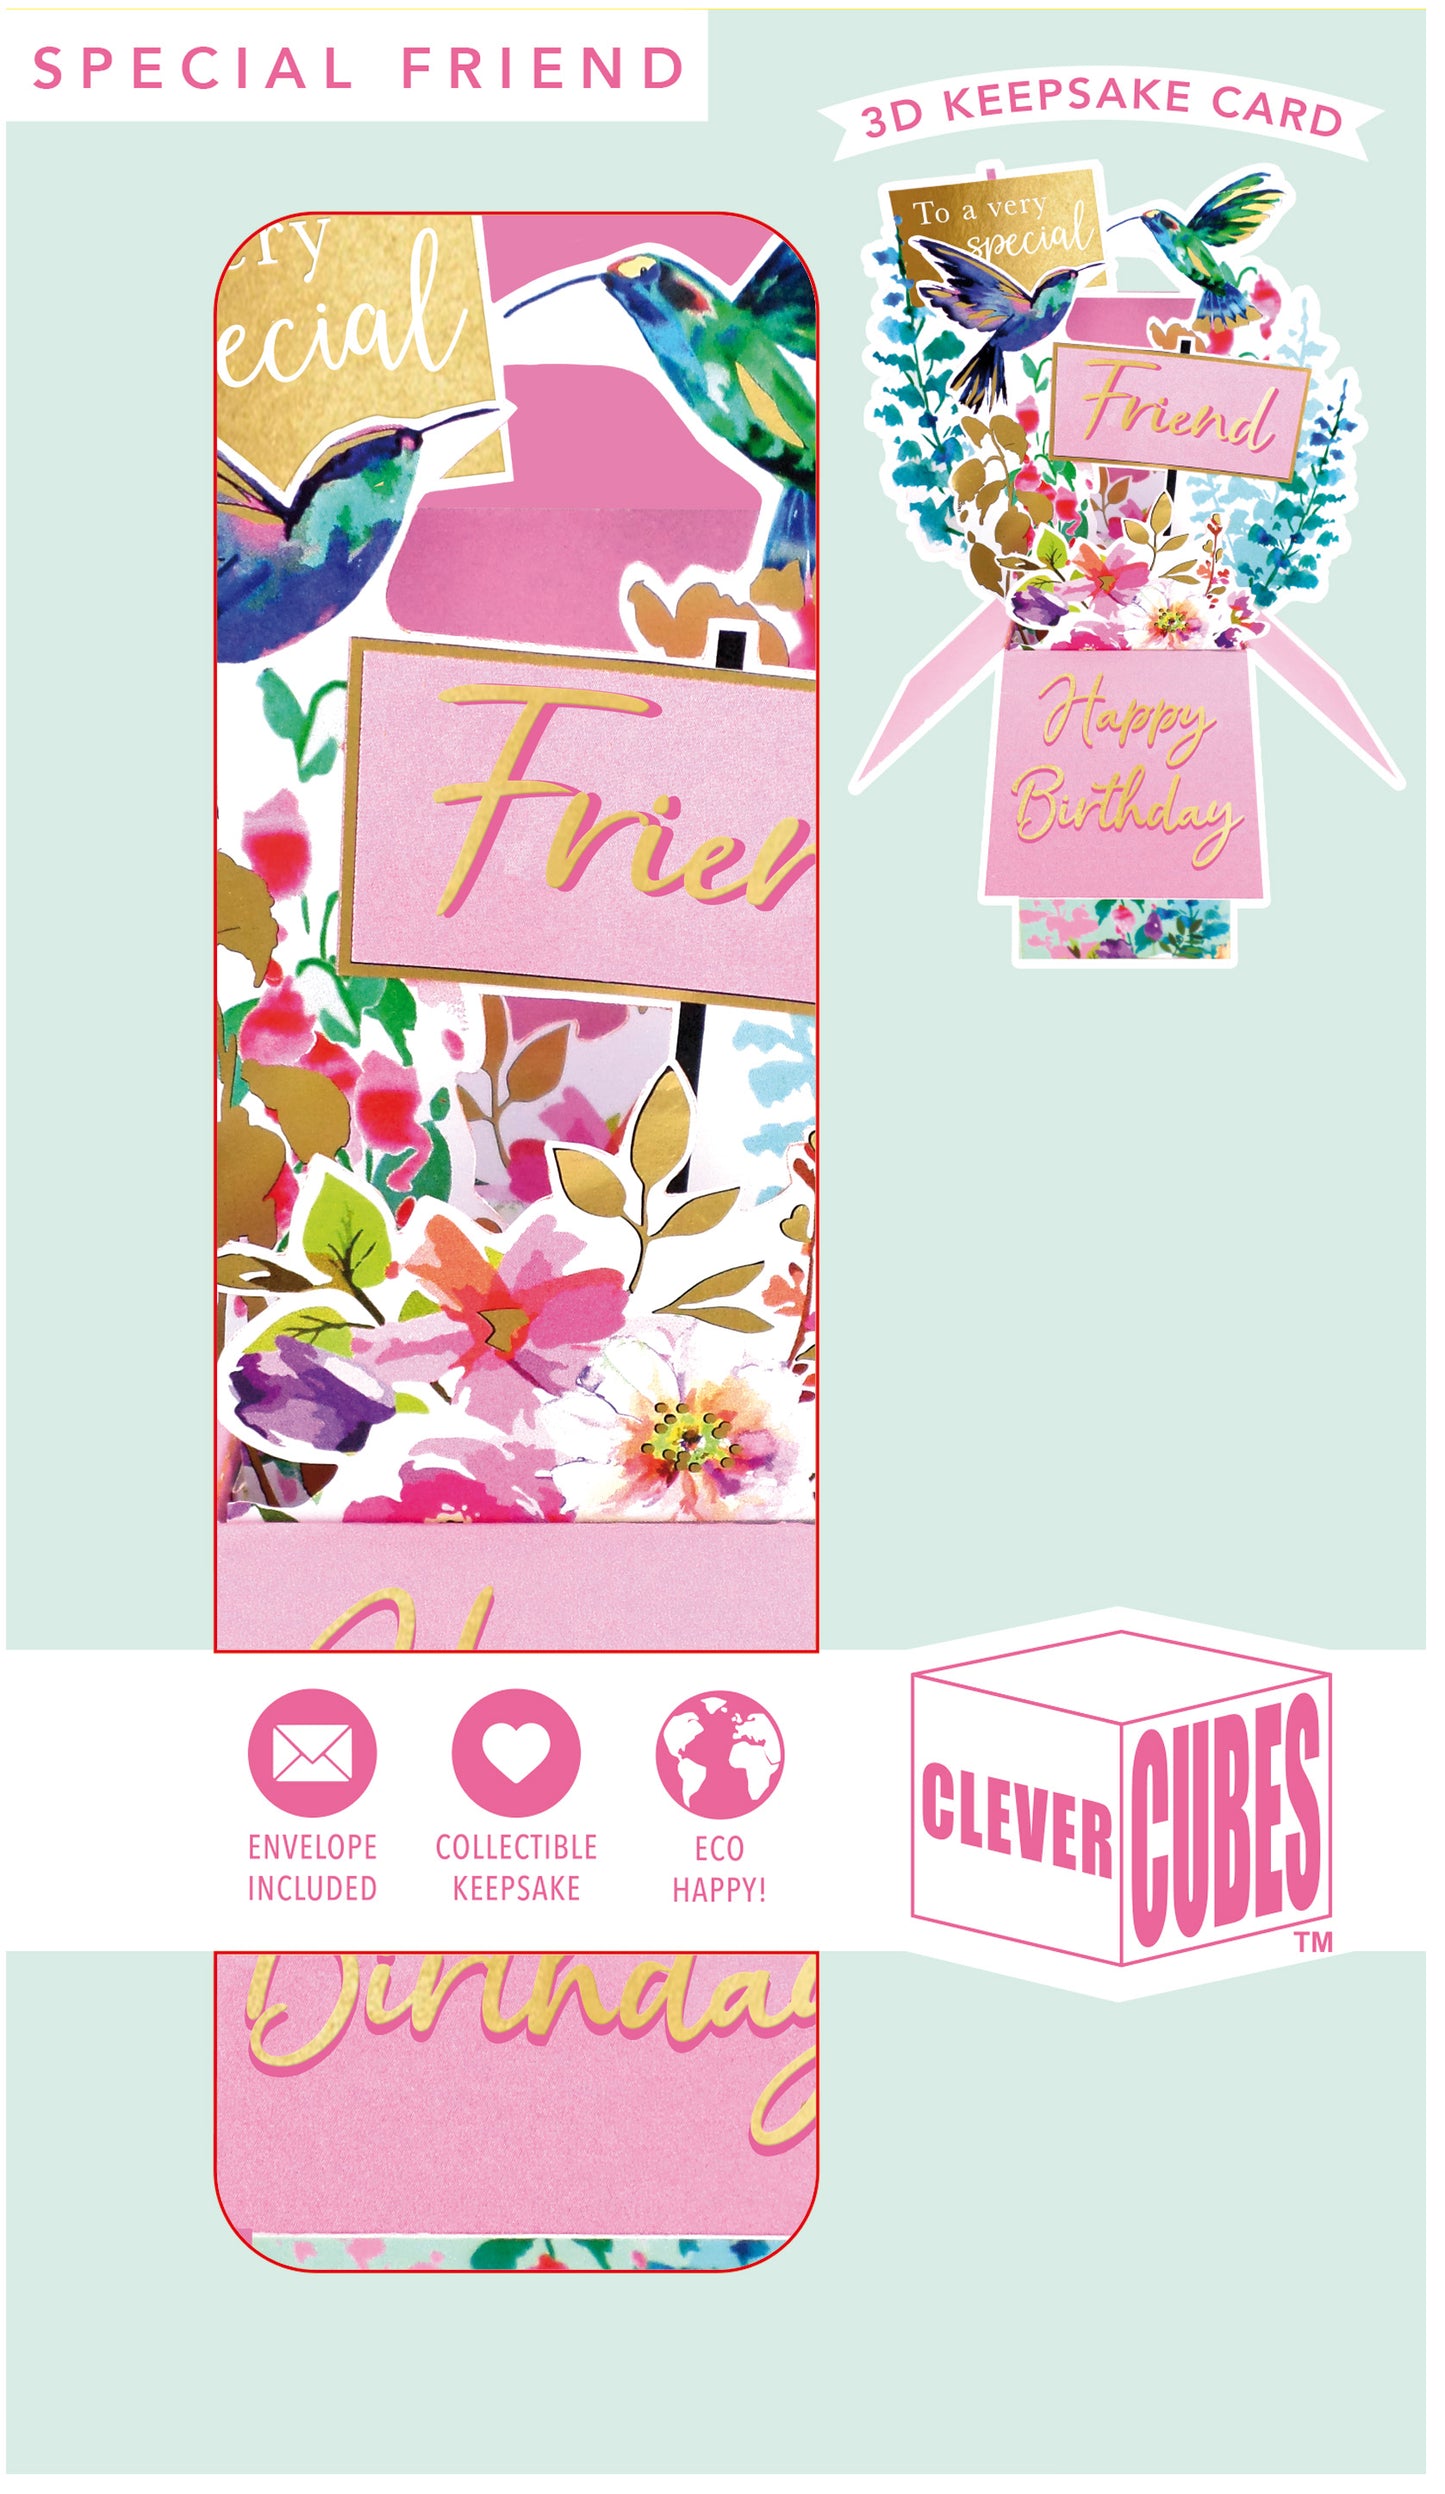 Clever Cube Very Special Friend Fluttering Fun! Birthday Pop Up Greeting Card